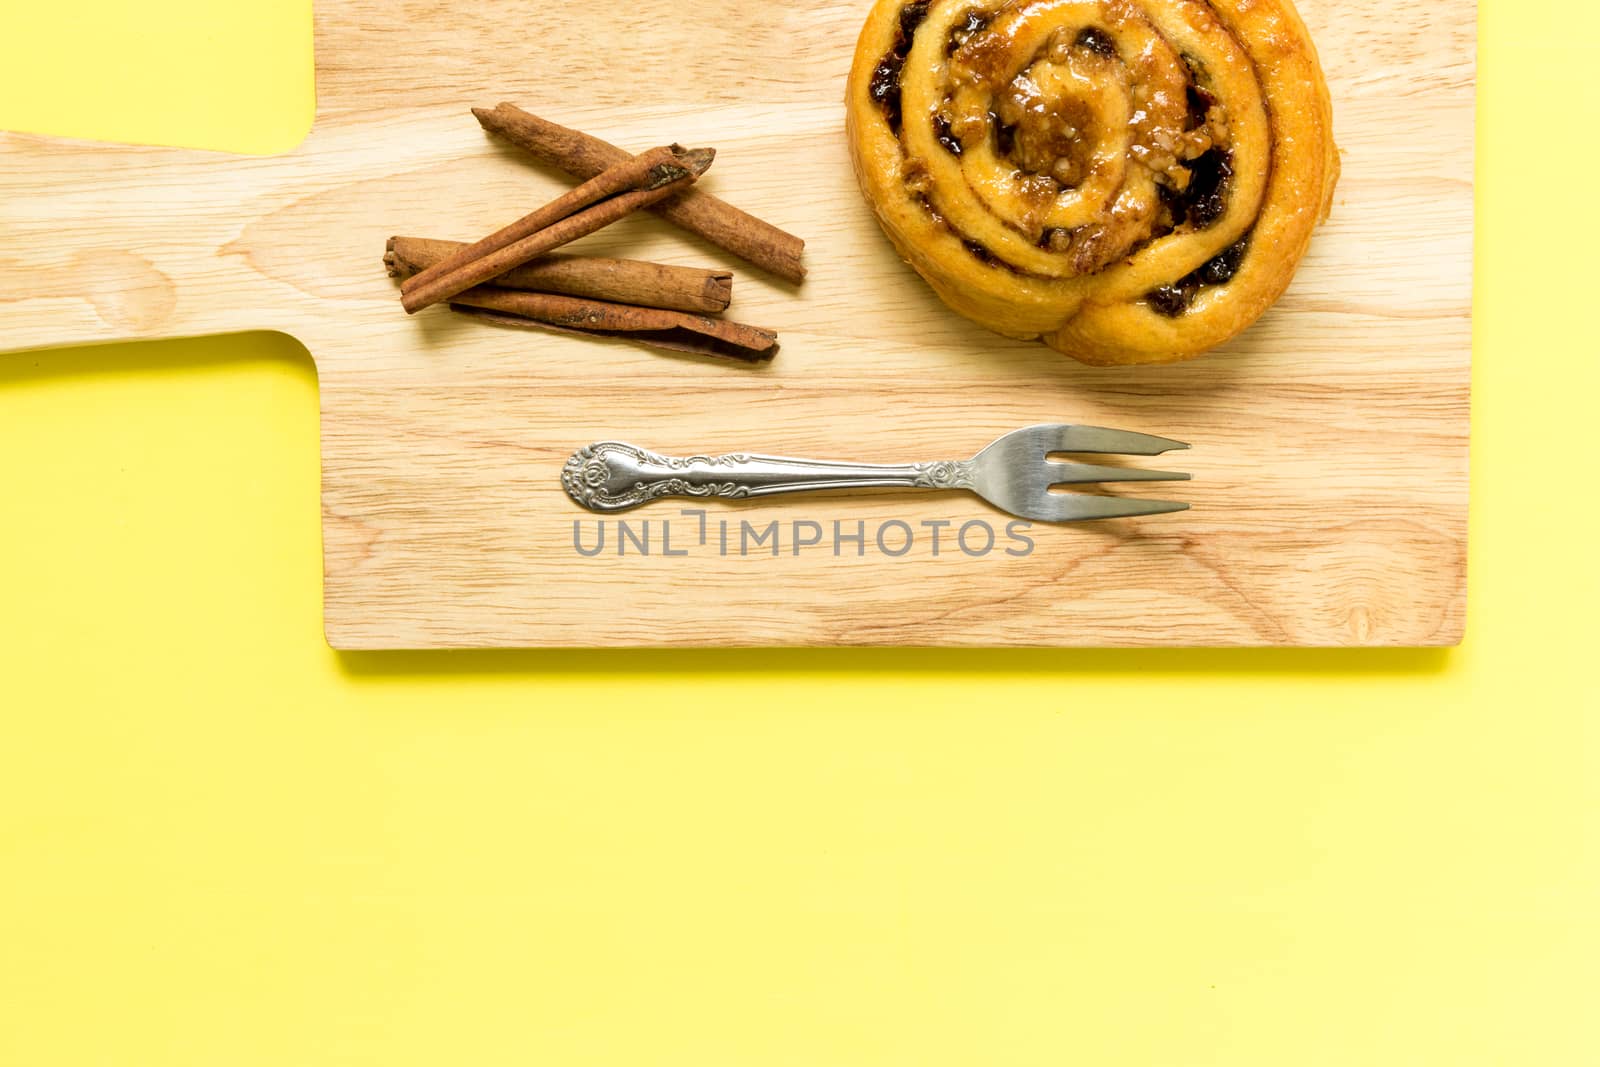 Cinnamon roll freshly made to eat with tea for break.